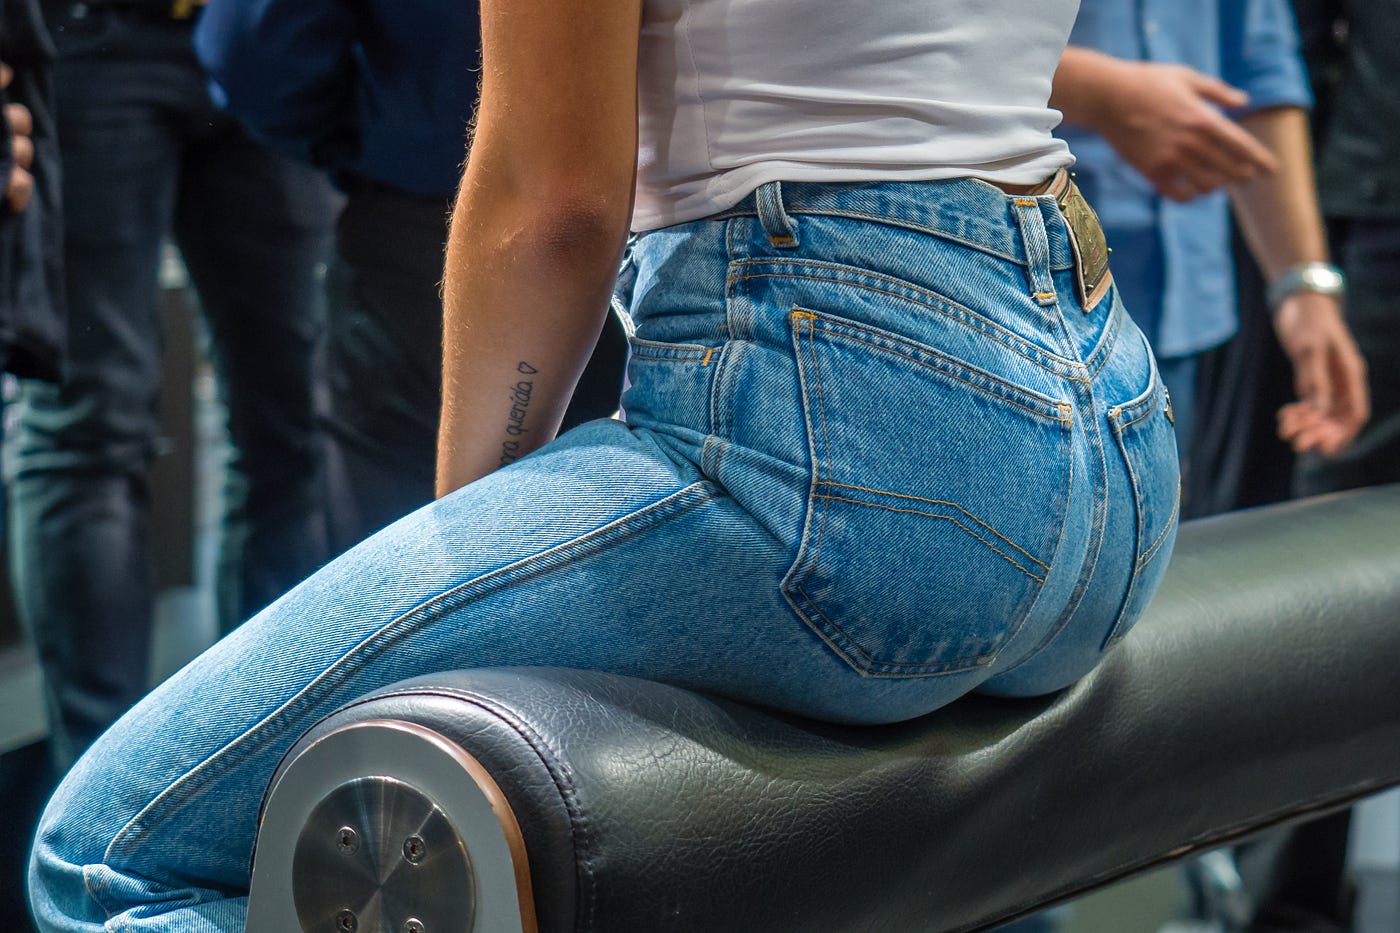 Dr. Fauci Weighs In On How All That Ass Can Fit In Them Jeans | by Emily  Kapp & Daniel Stillman | How Pants Work | Medium